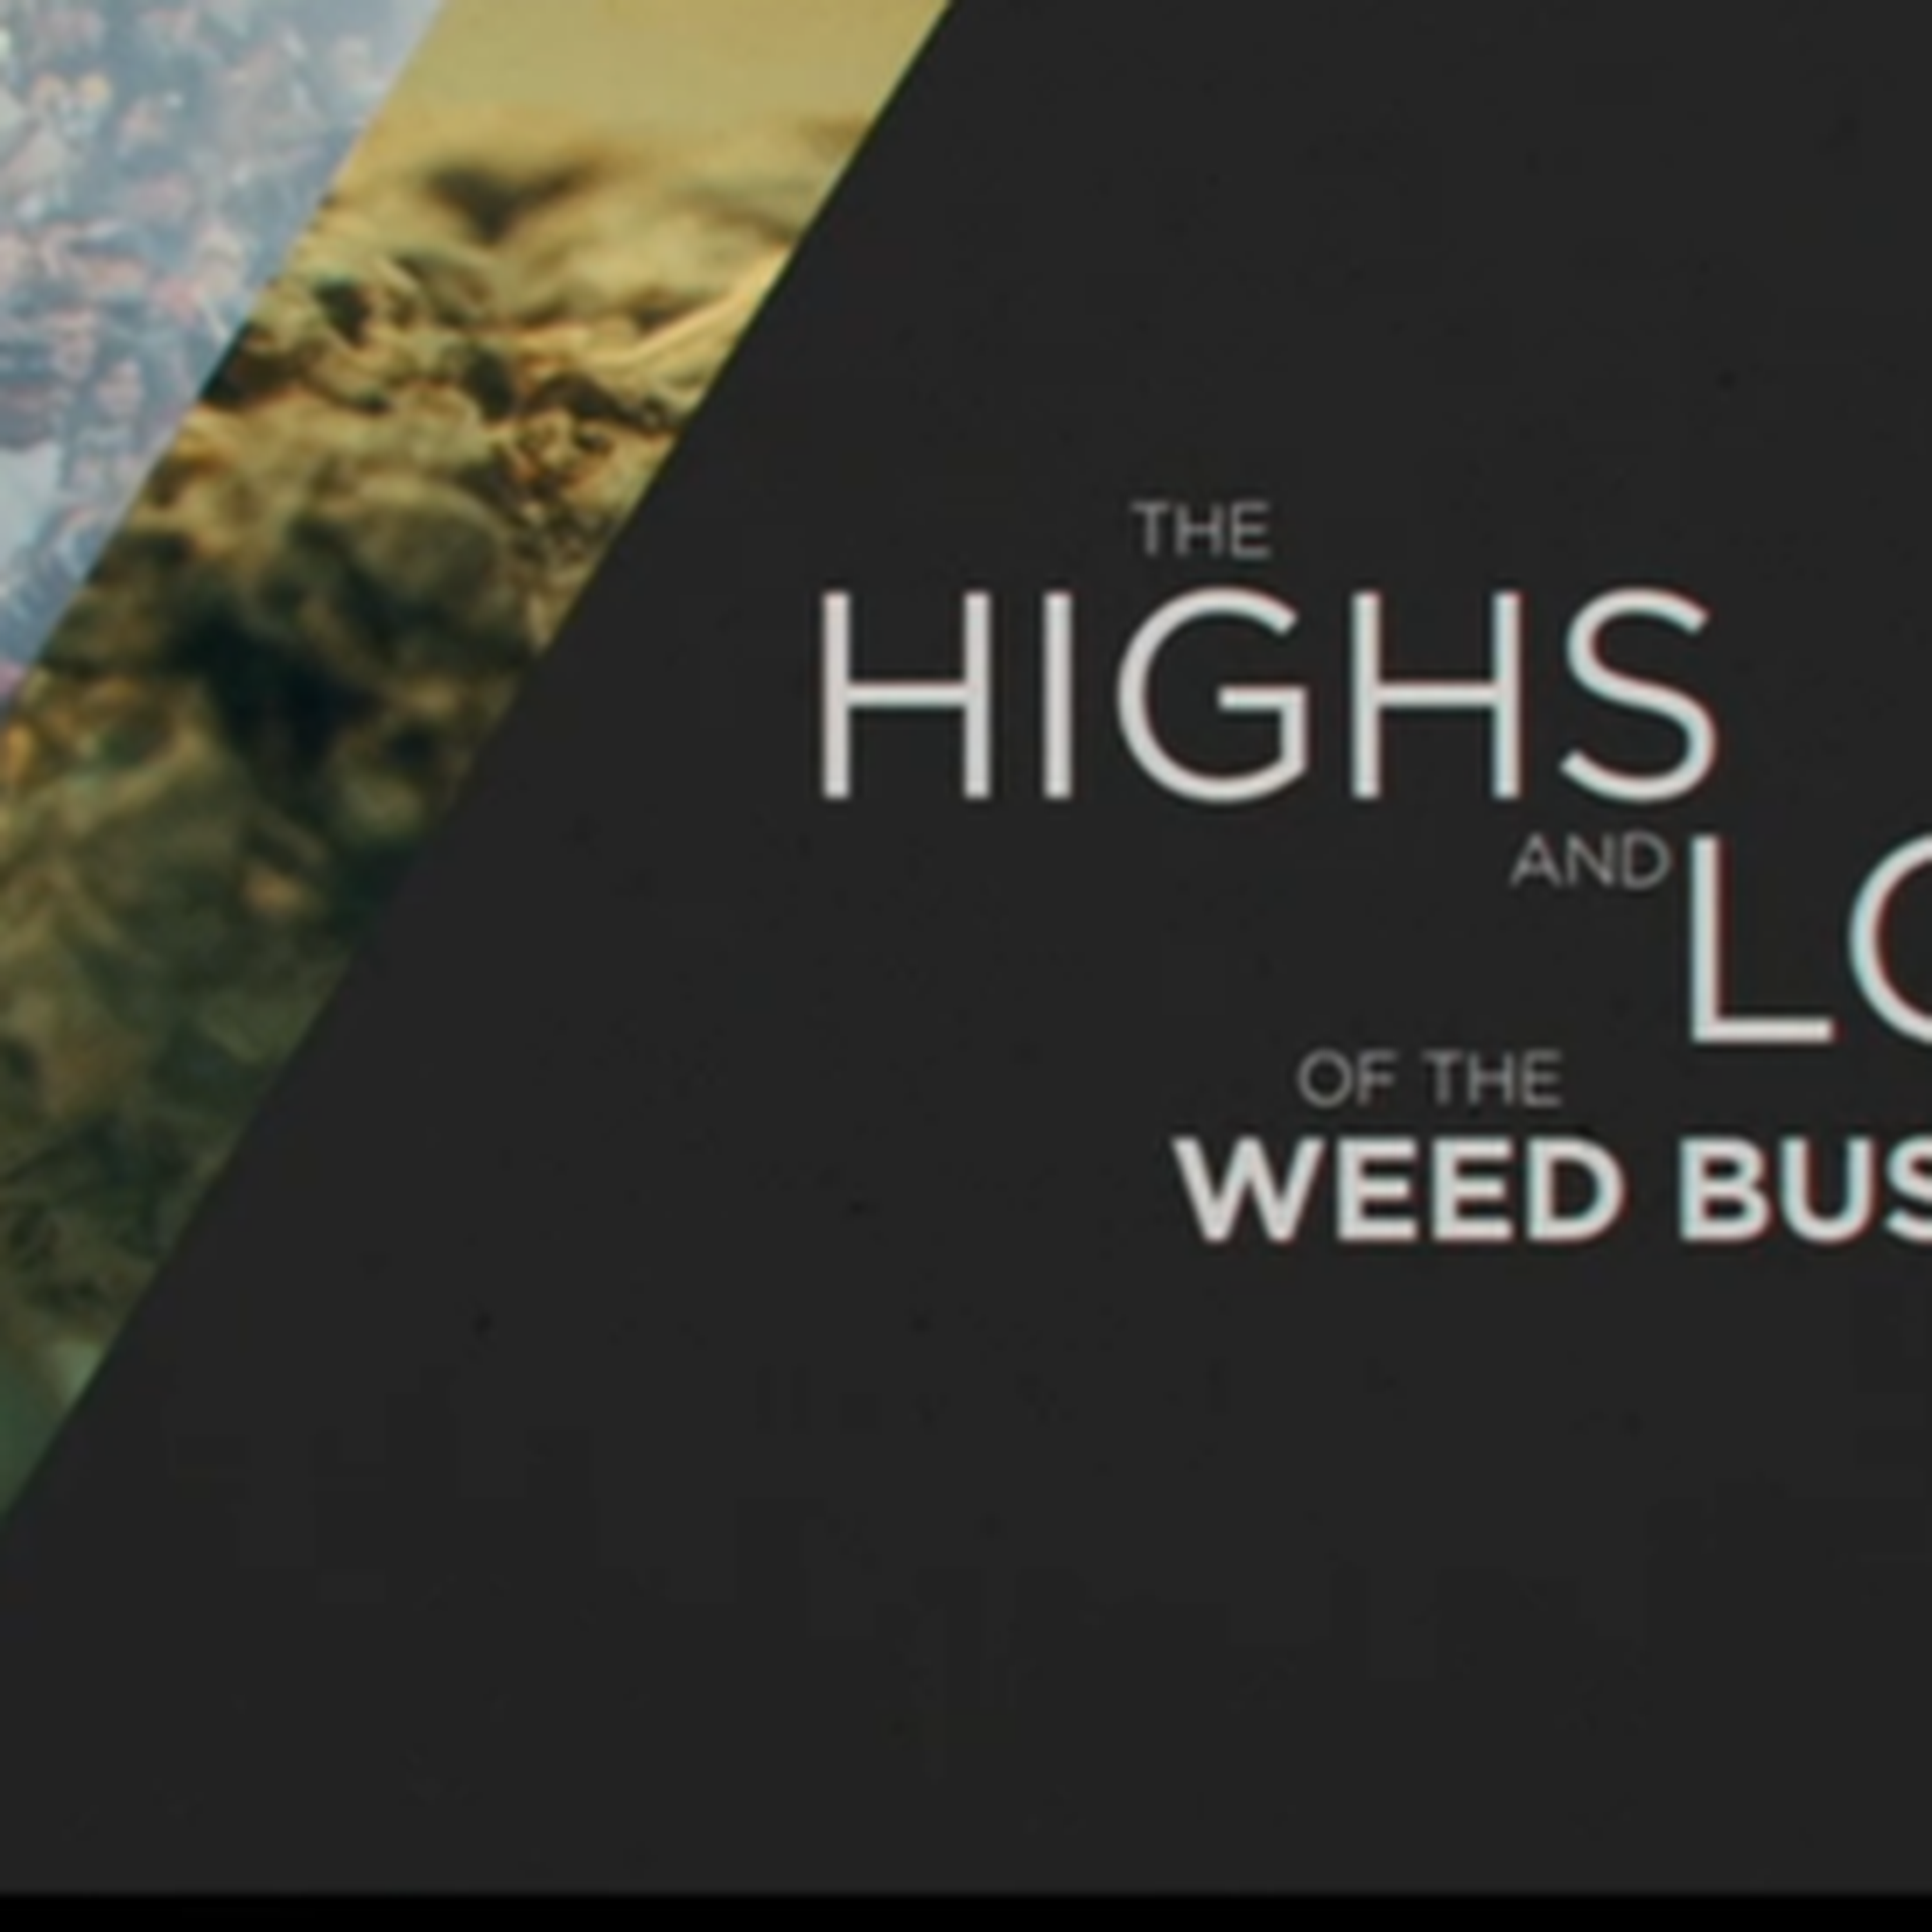 Colorado: The Highs and Lows of the Weed Business